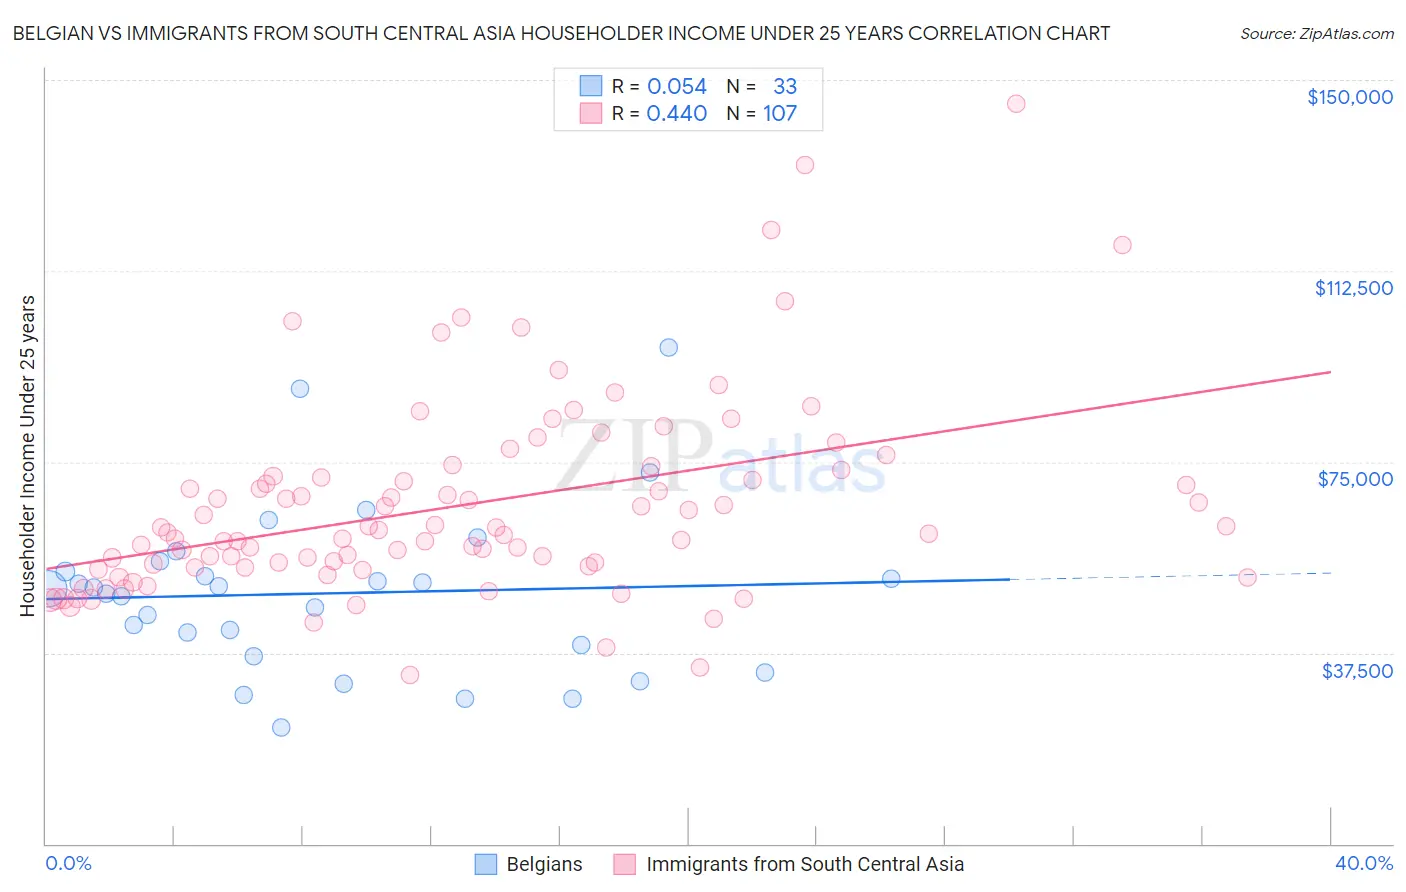 Belgian vs Immigrants from South Central Asia Householder Income Under 25 years